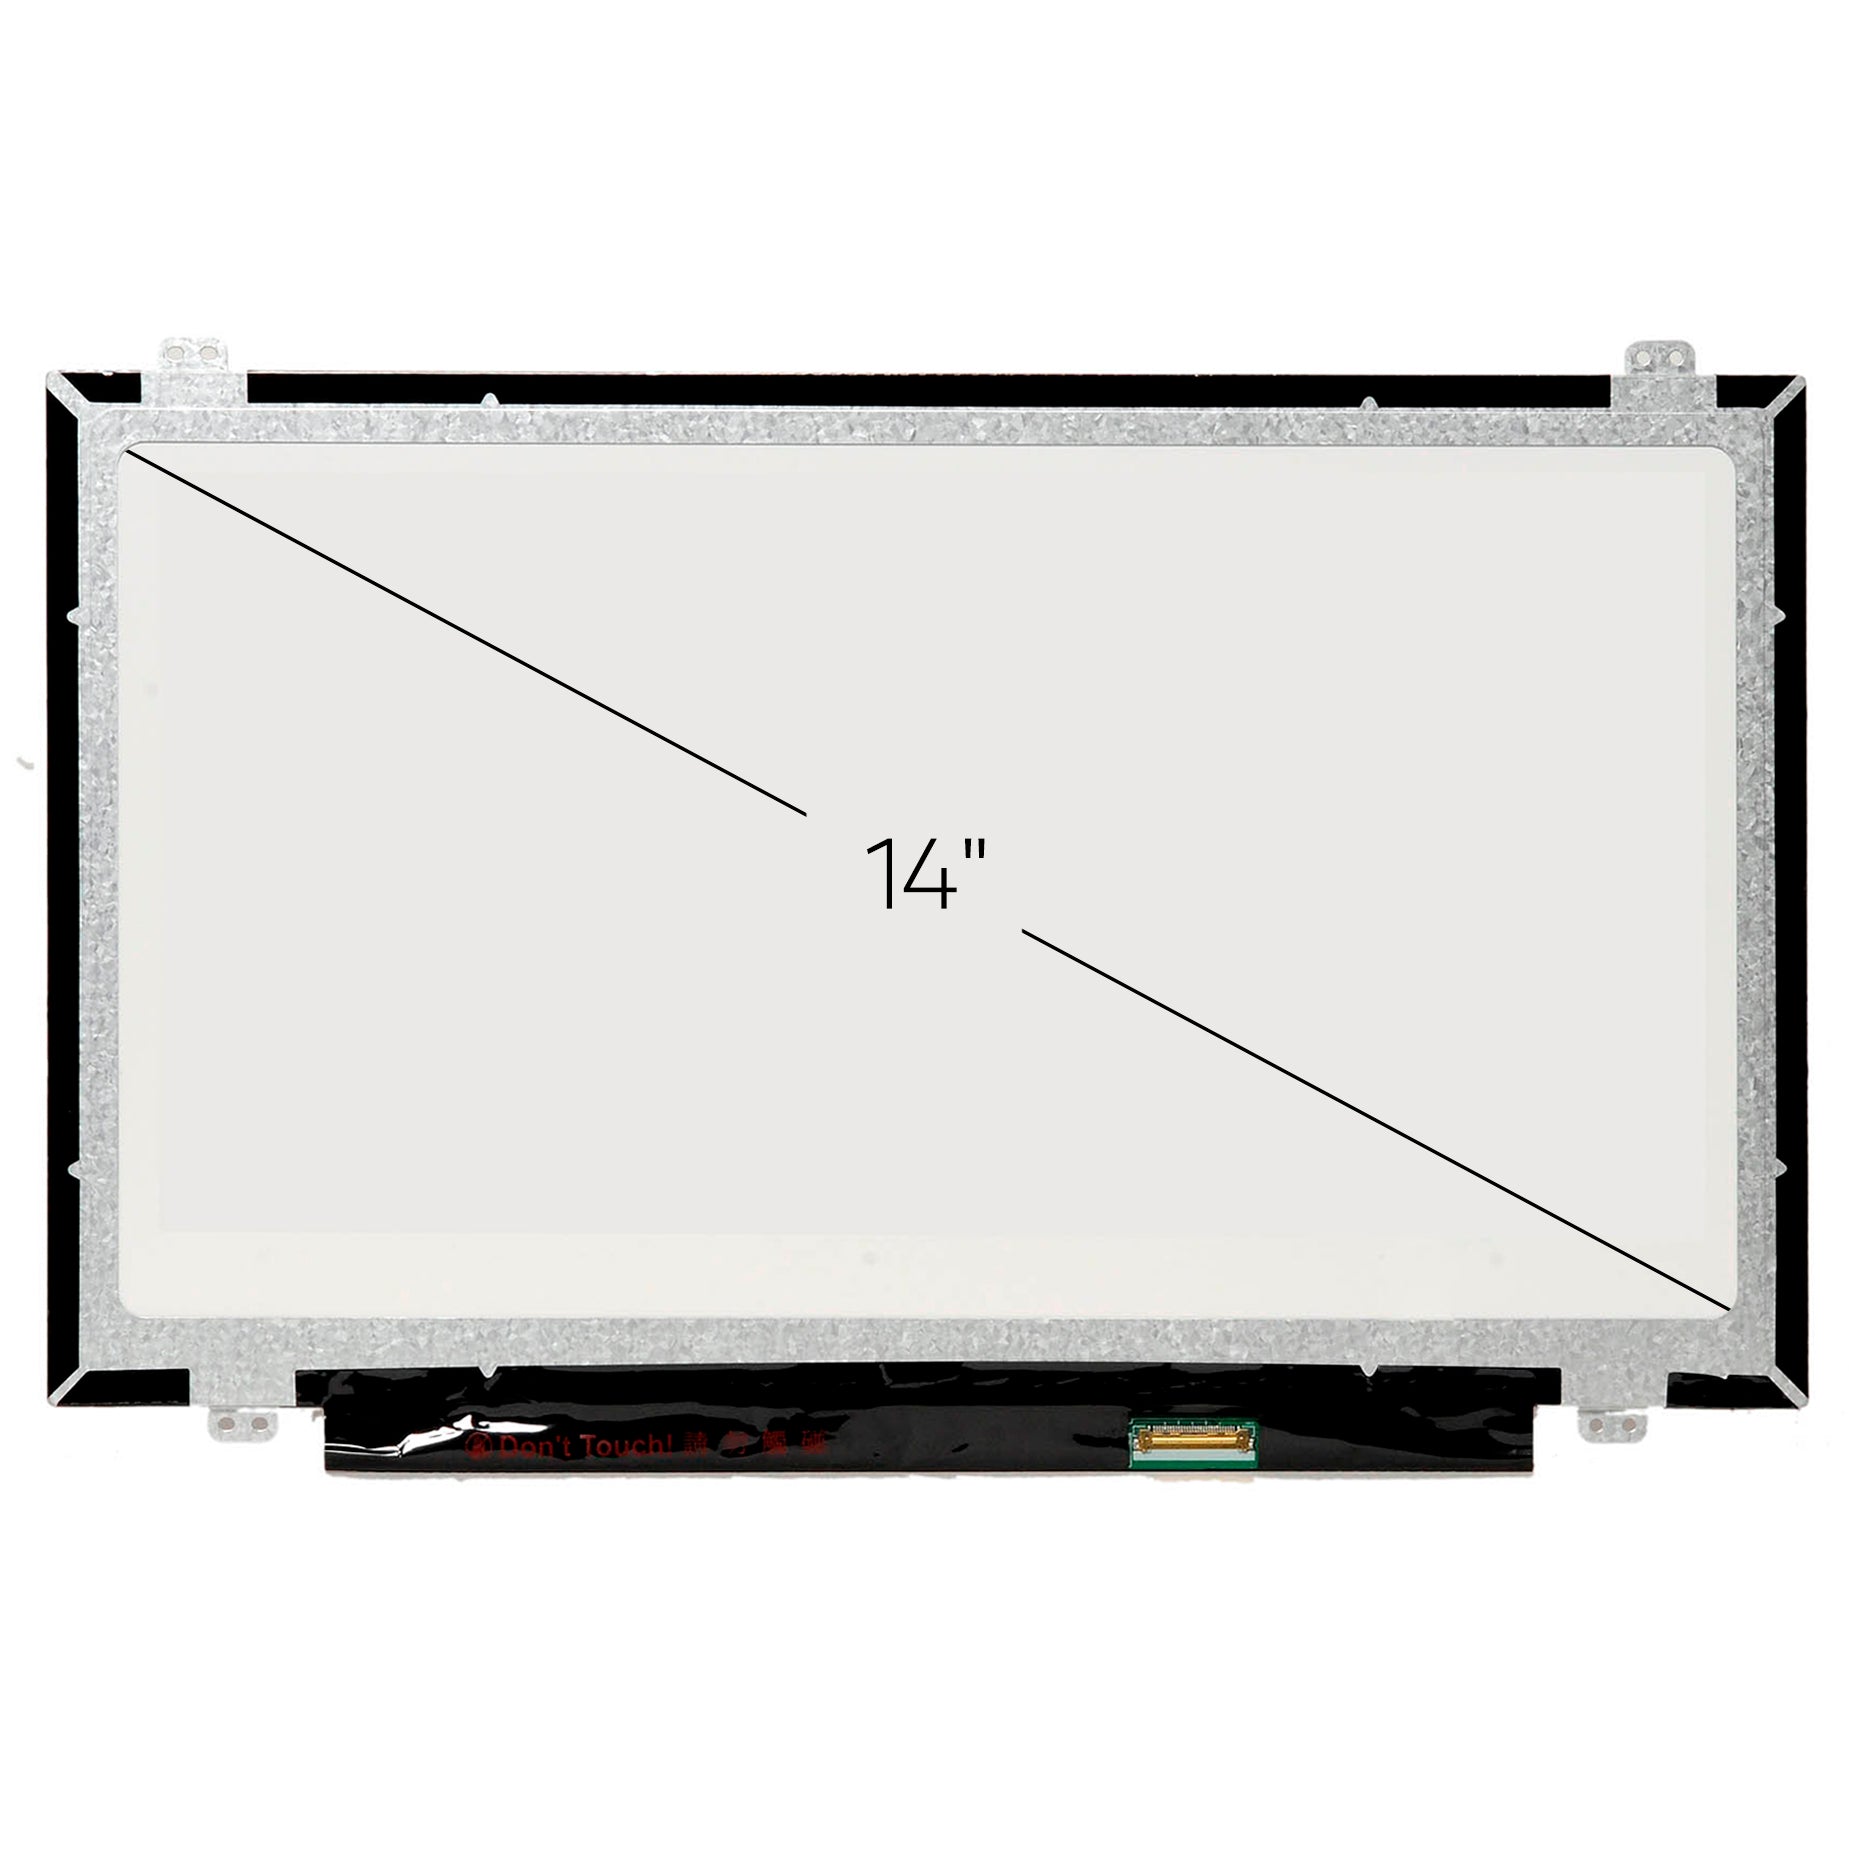 Screen Replacement for HP Chromebook 14-AK031NR HD 1366x768 Glossy LCD LED Display